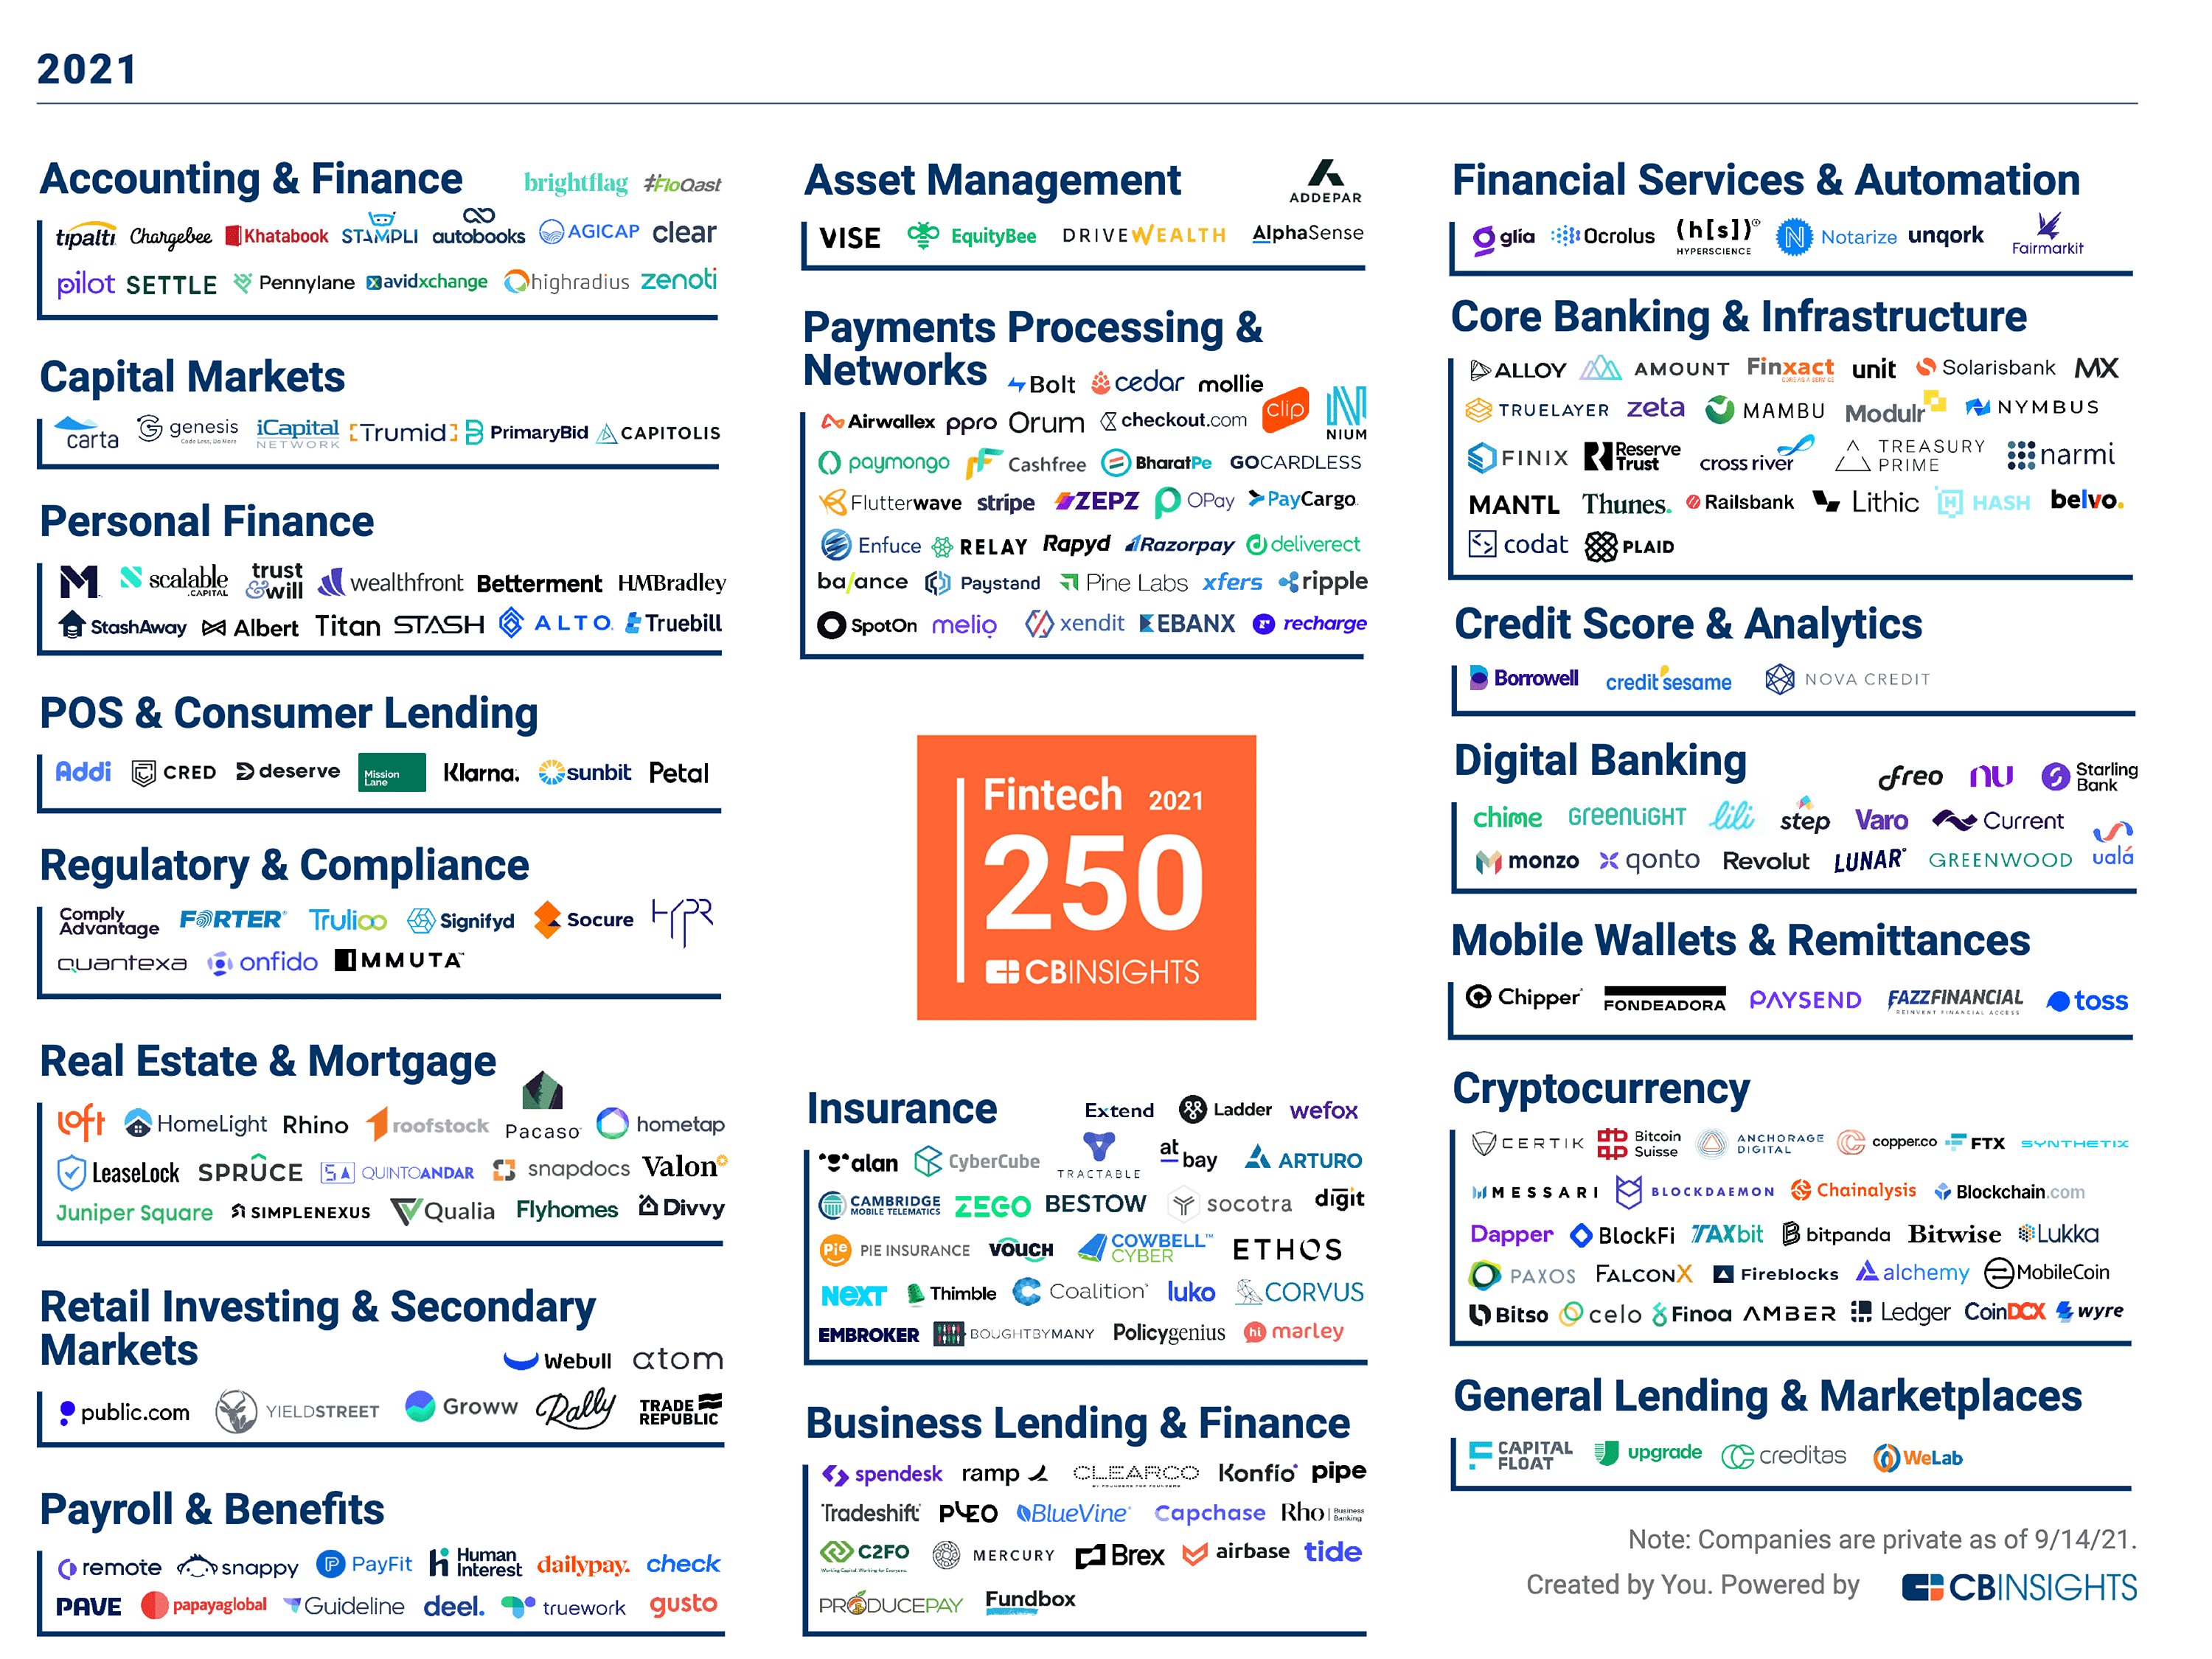 halvkugle krave Credential The Fintech 250: The most promising fintech companies of 2022 - CB Insights  Research